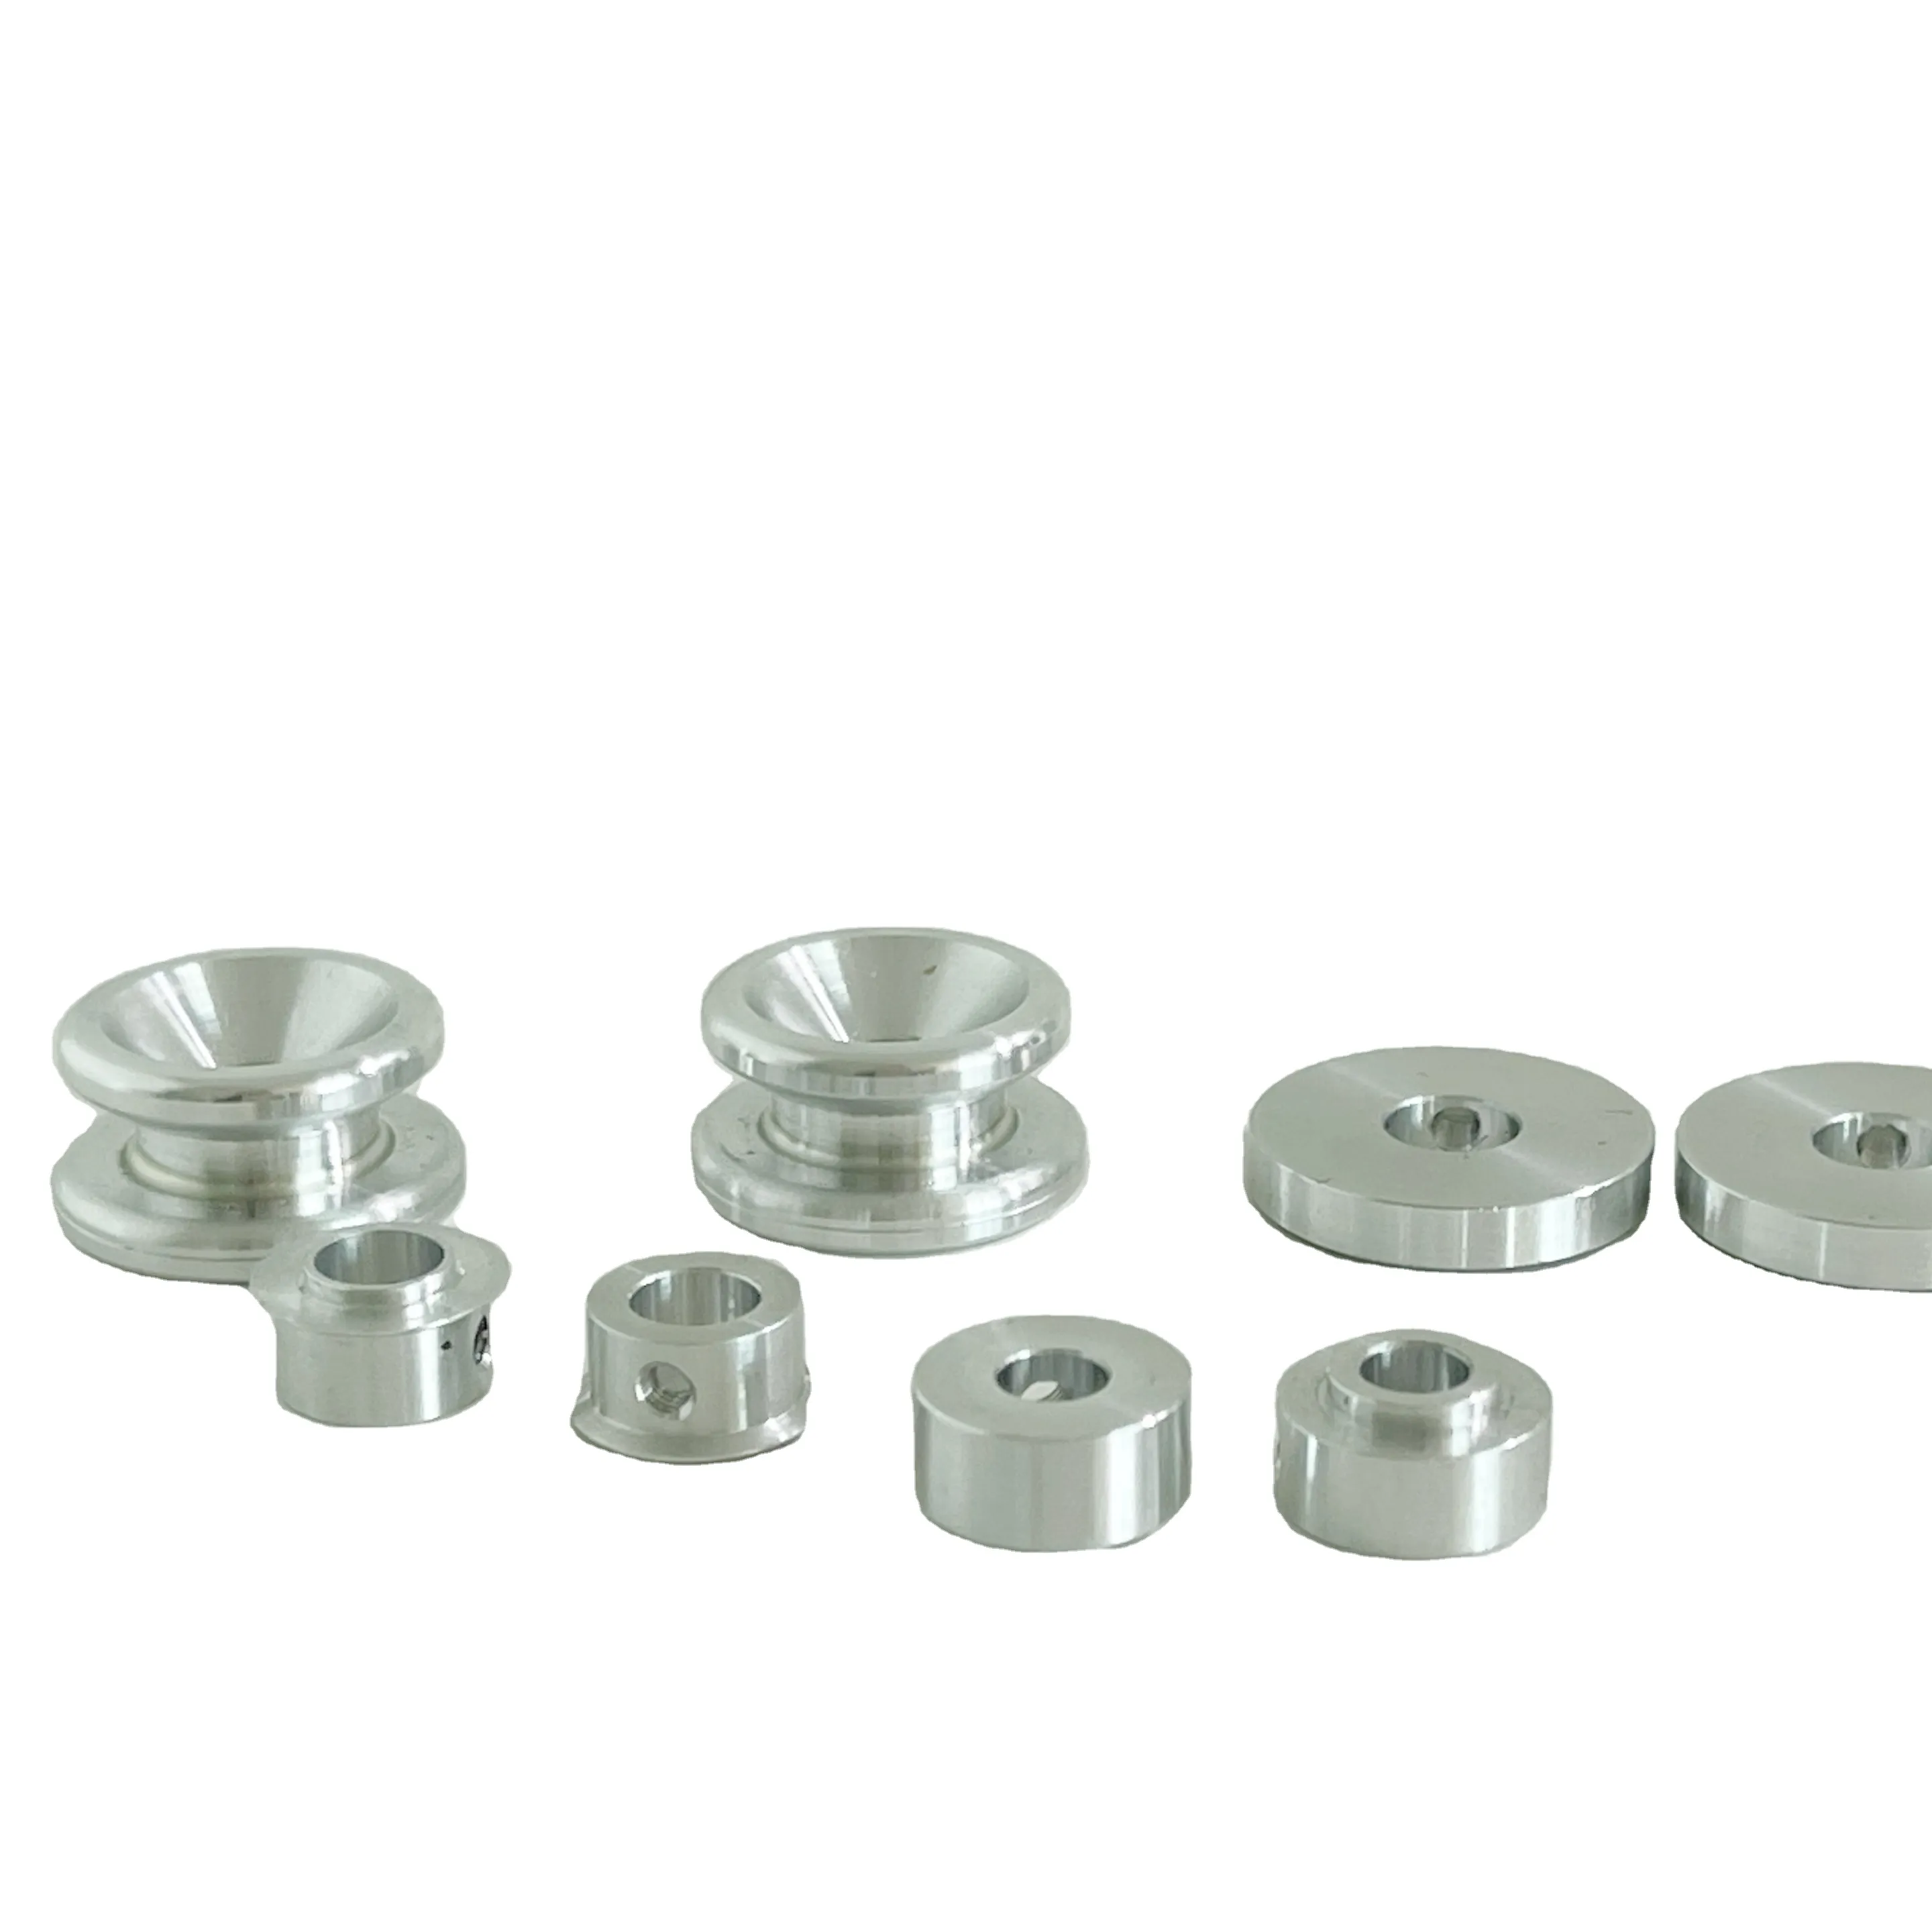 Set collars high precision 5-axis fastener collar stainless steel oxide black silver anodized Custom cnc machining parts